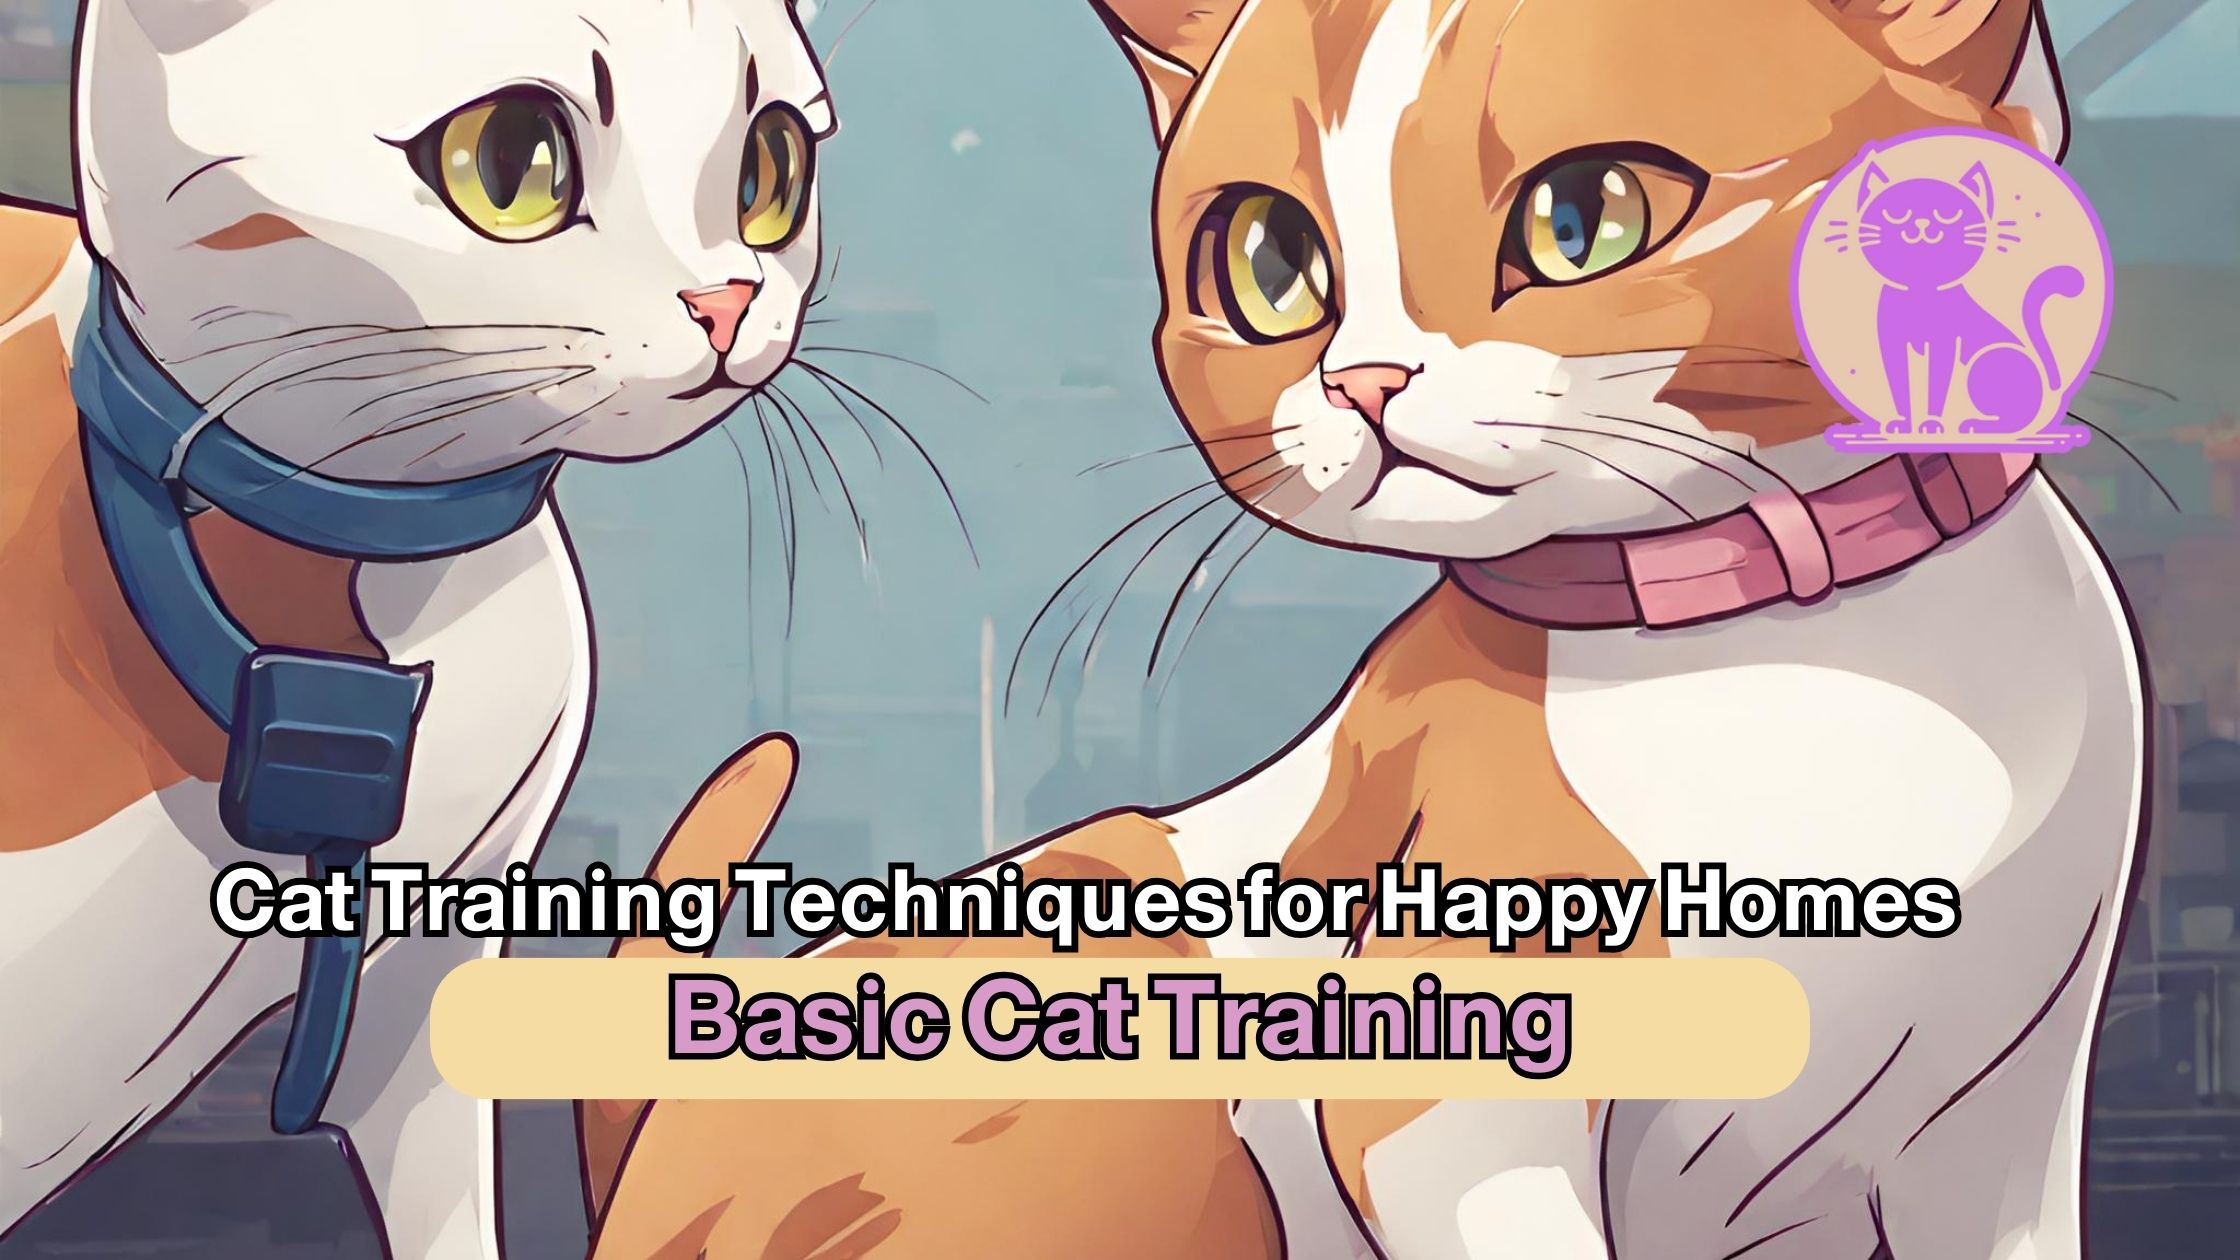 Basic Cat Training Techniques for Happy Homes